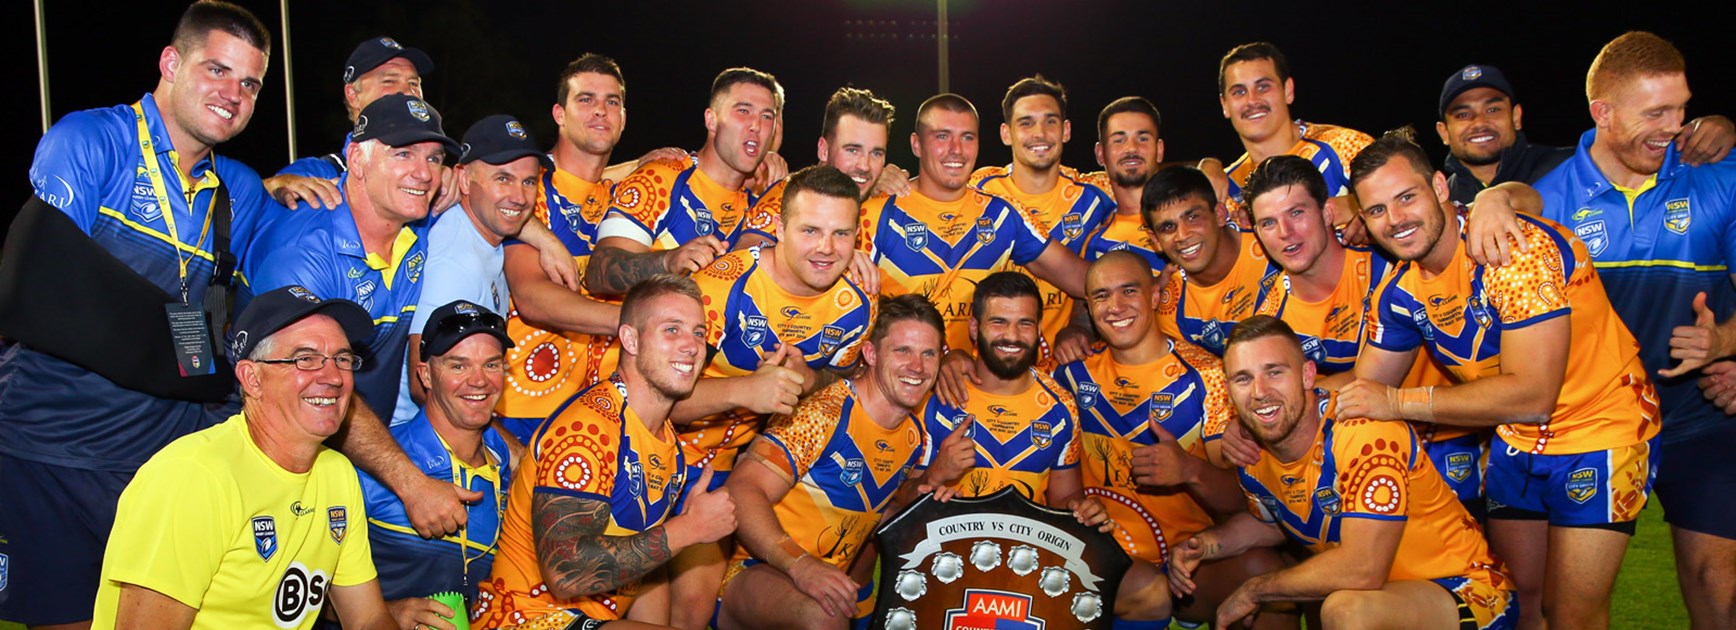 The victorious 2016 City Origin team following their win over Country.